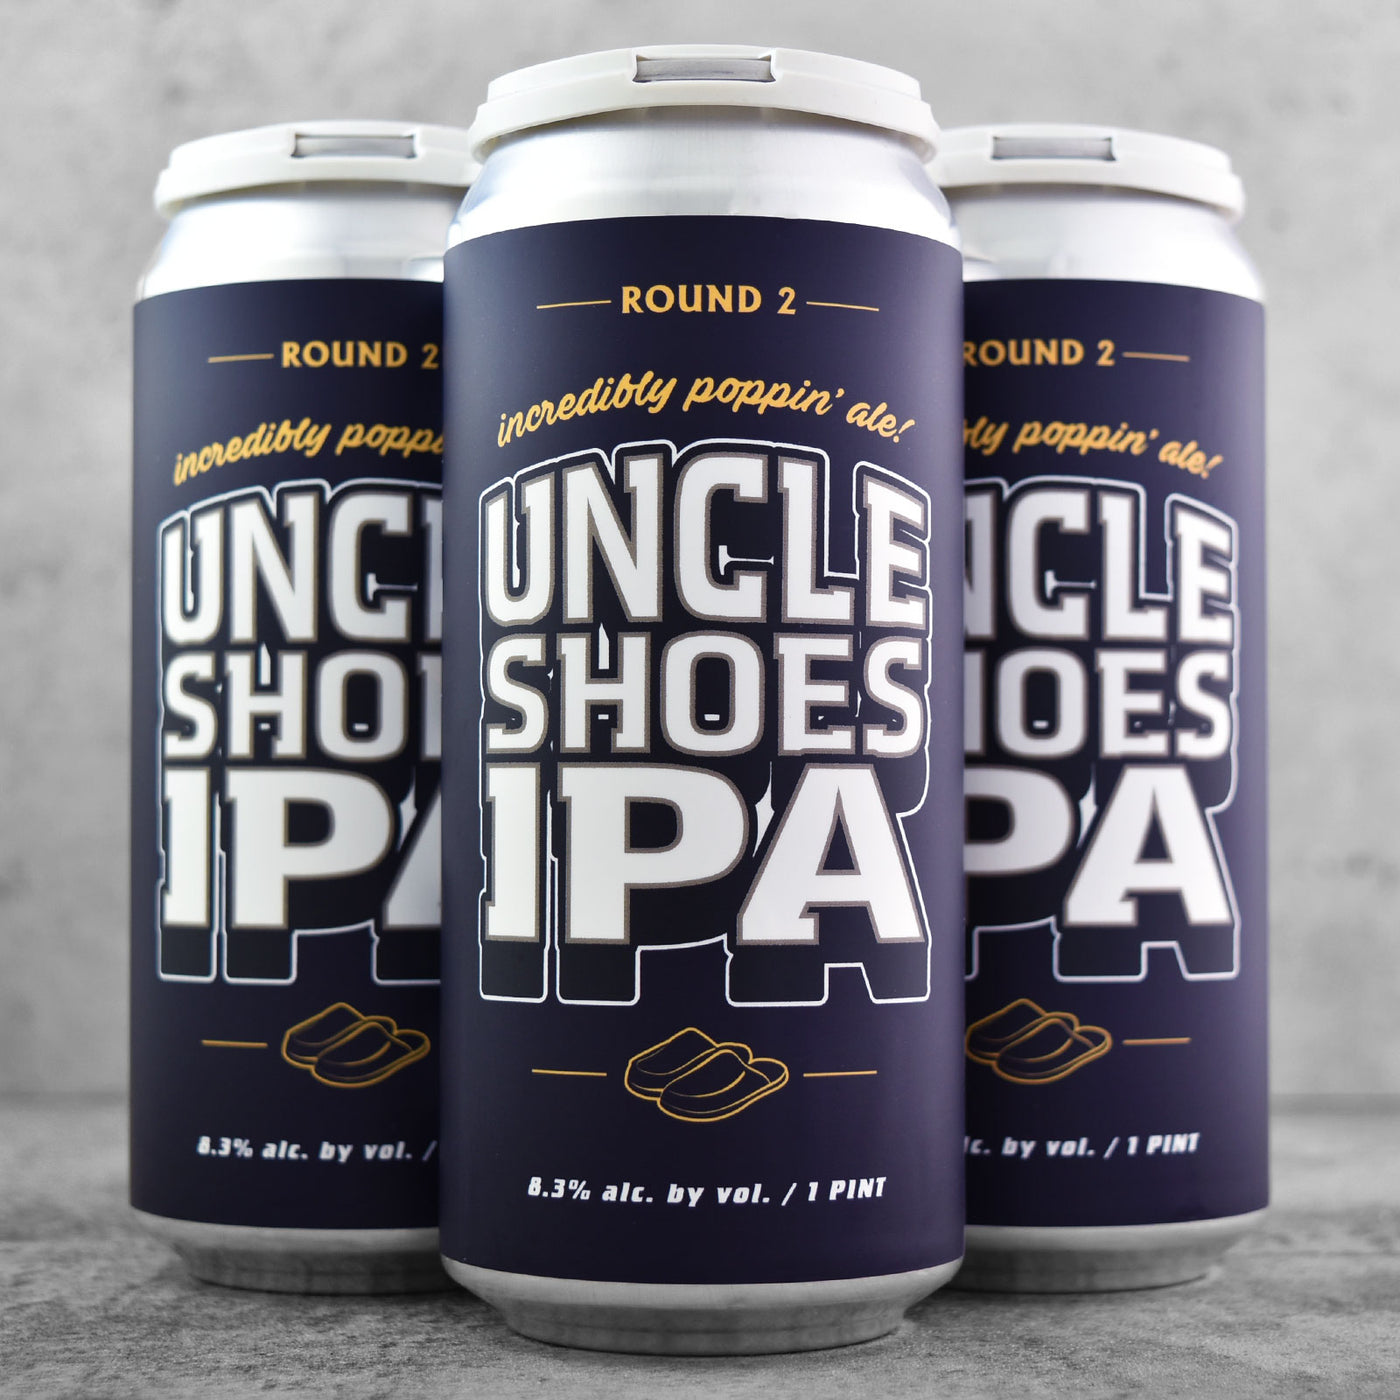 Uncle Shoes IPA